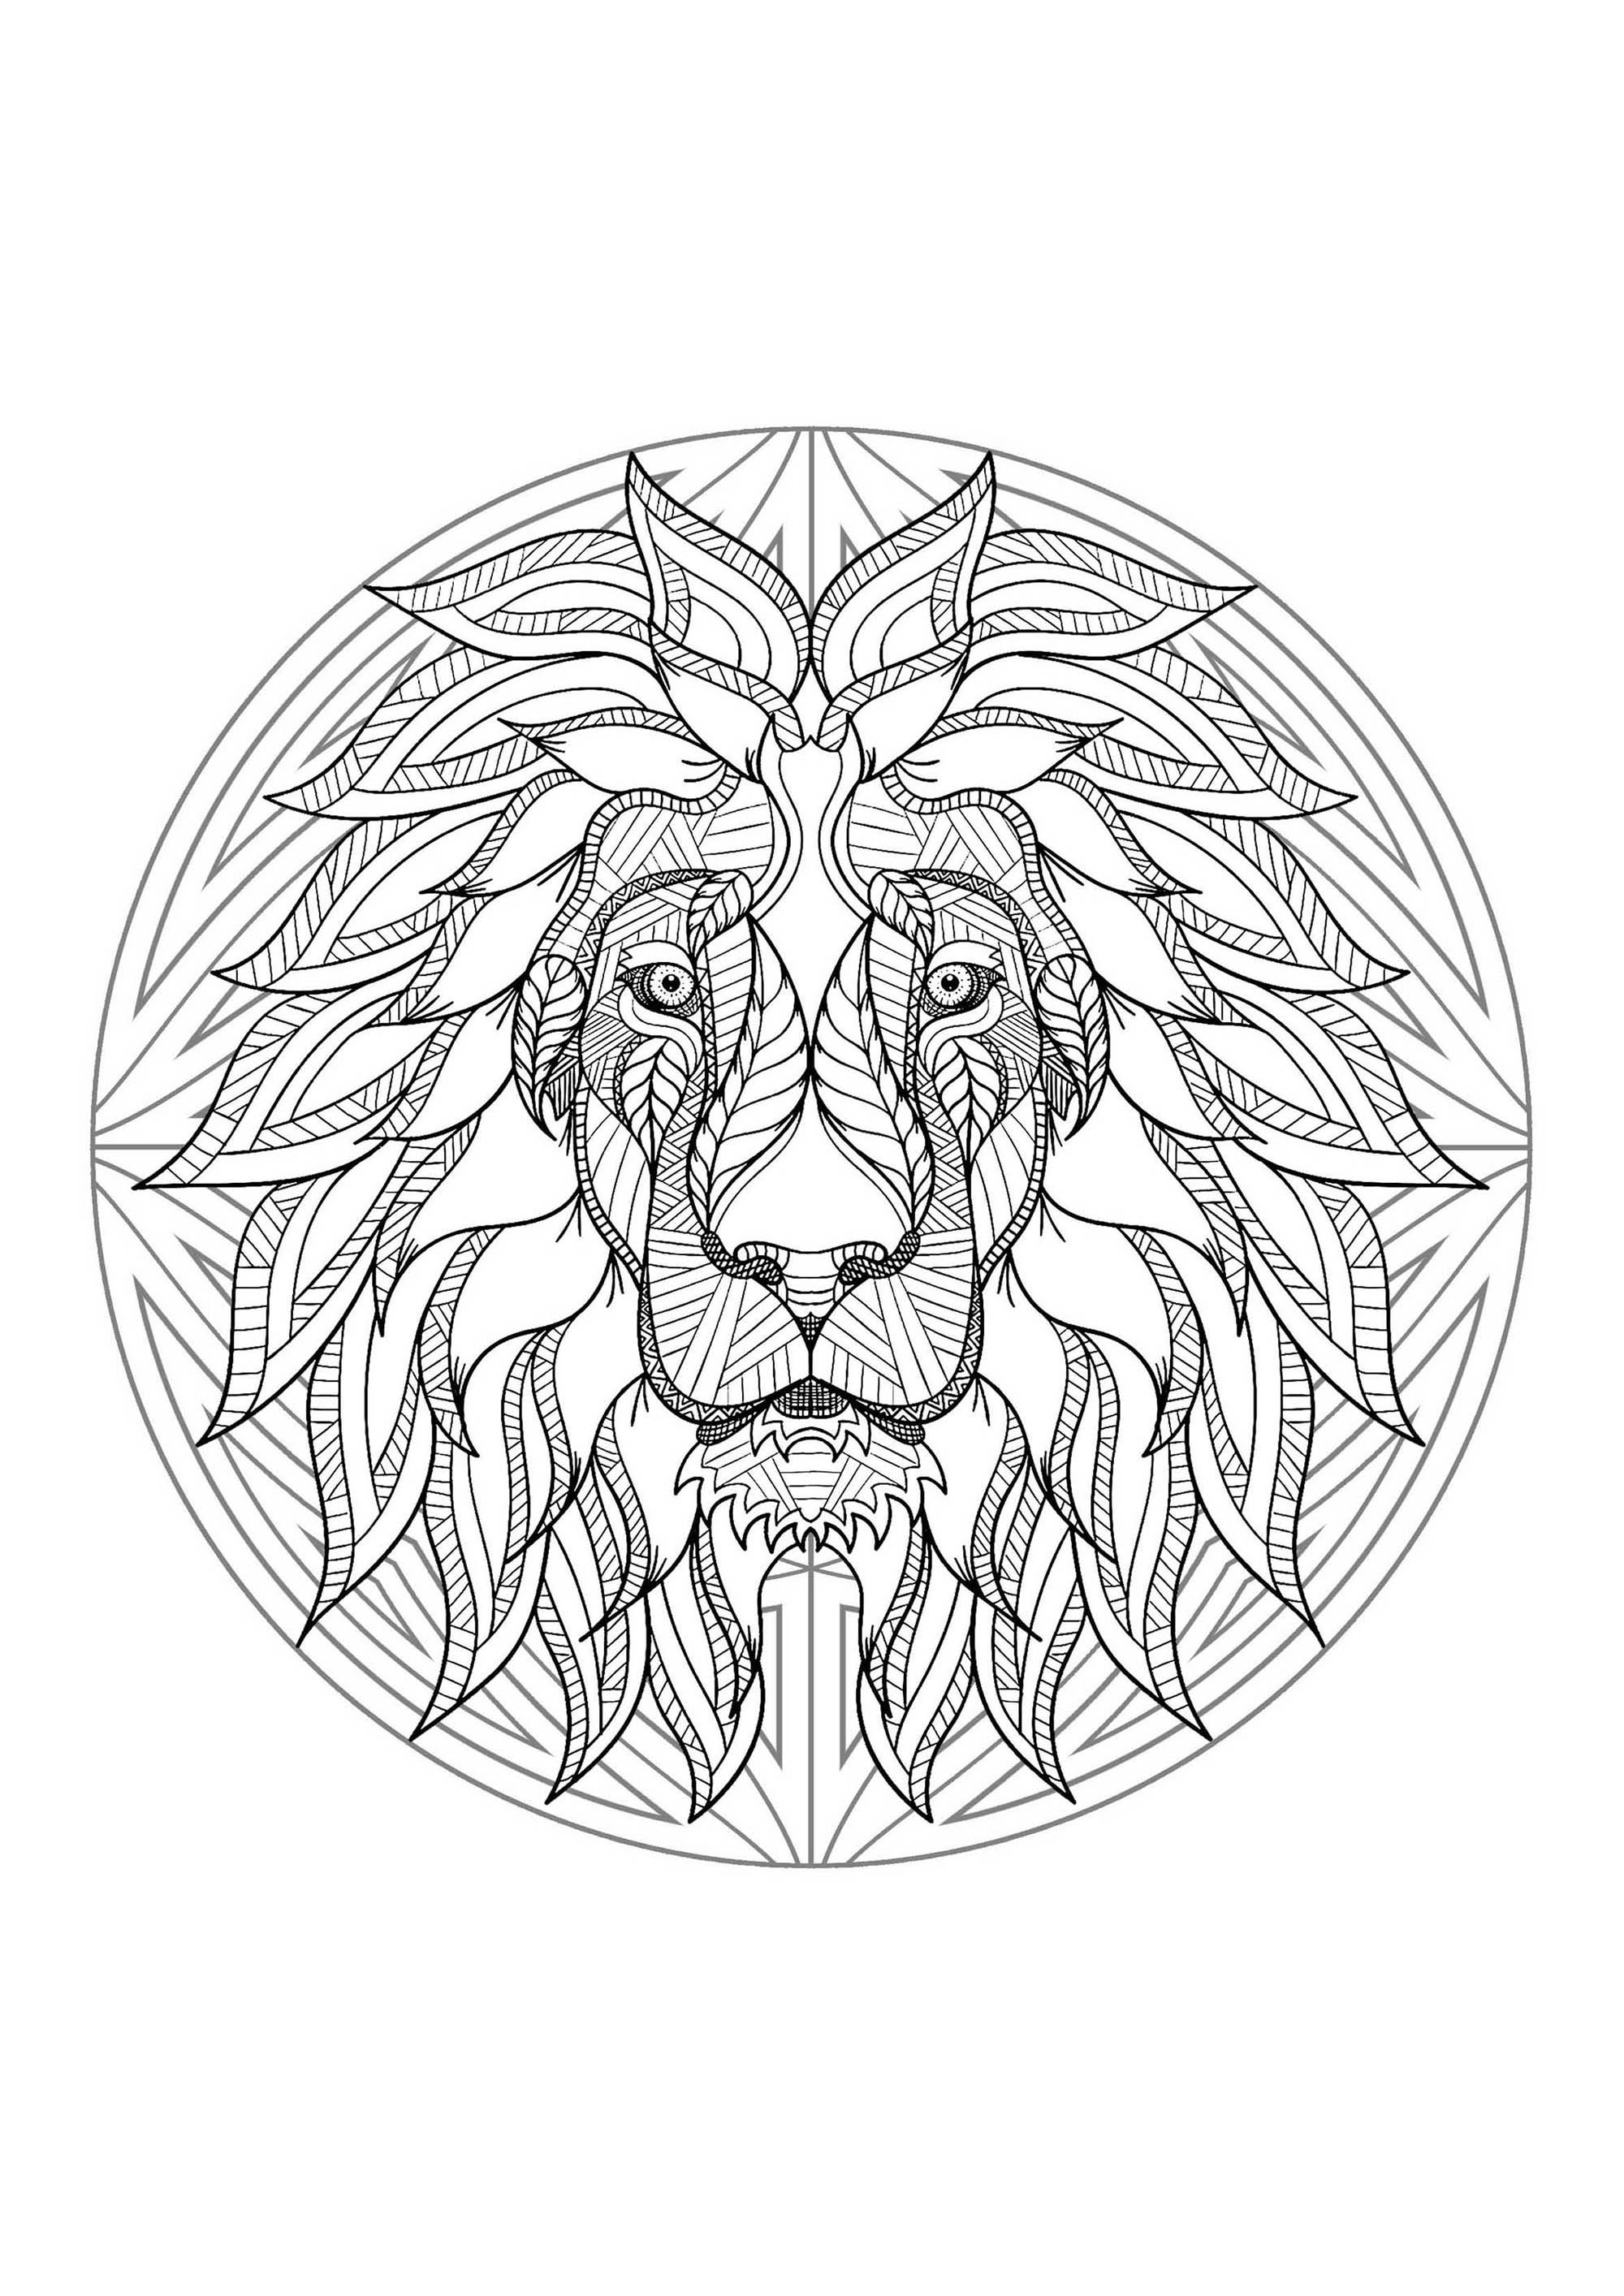 Mandala to color with very special Lion head and simple patterns in background